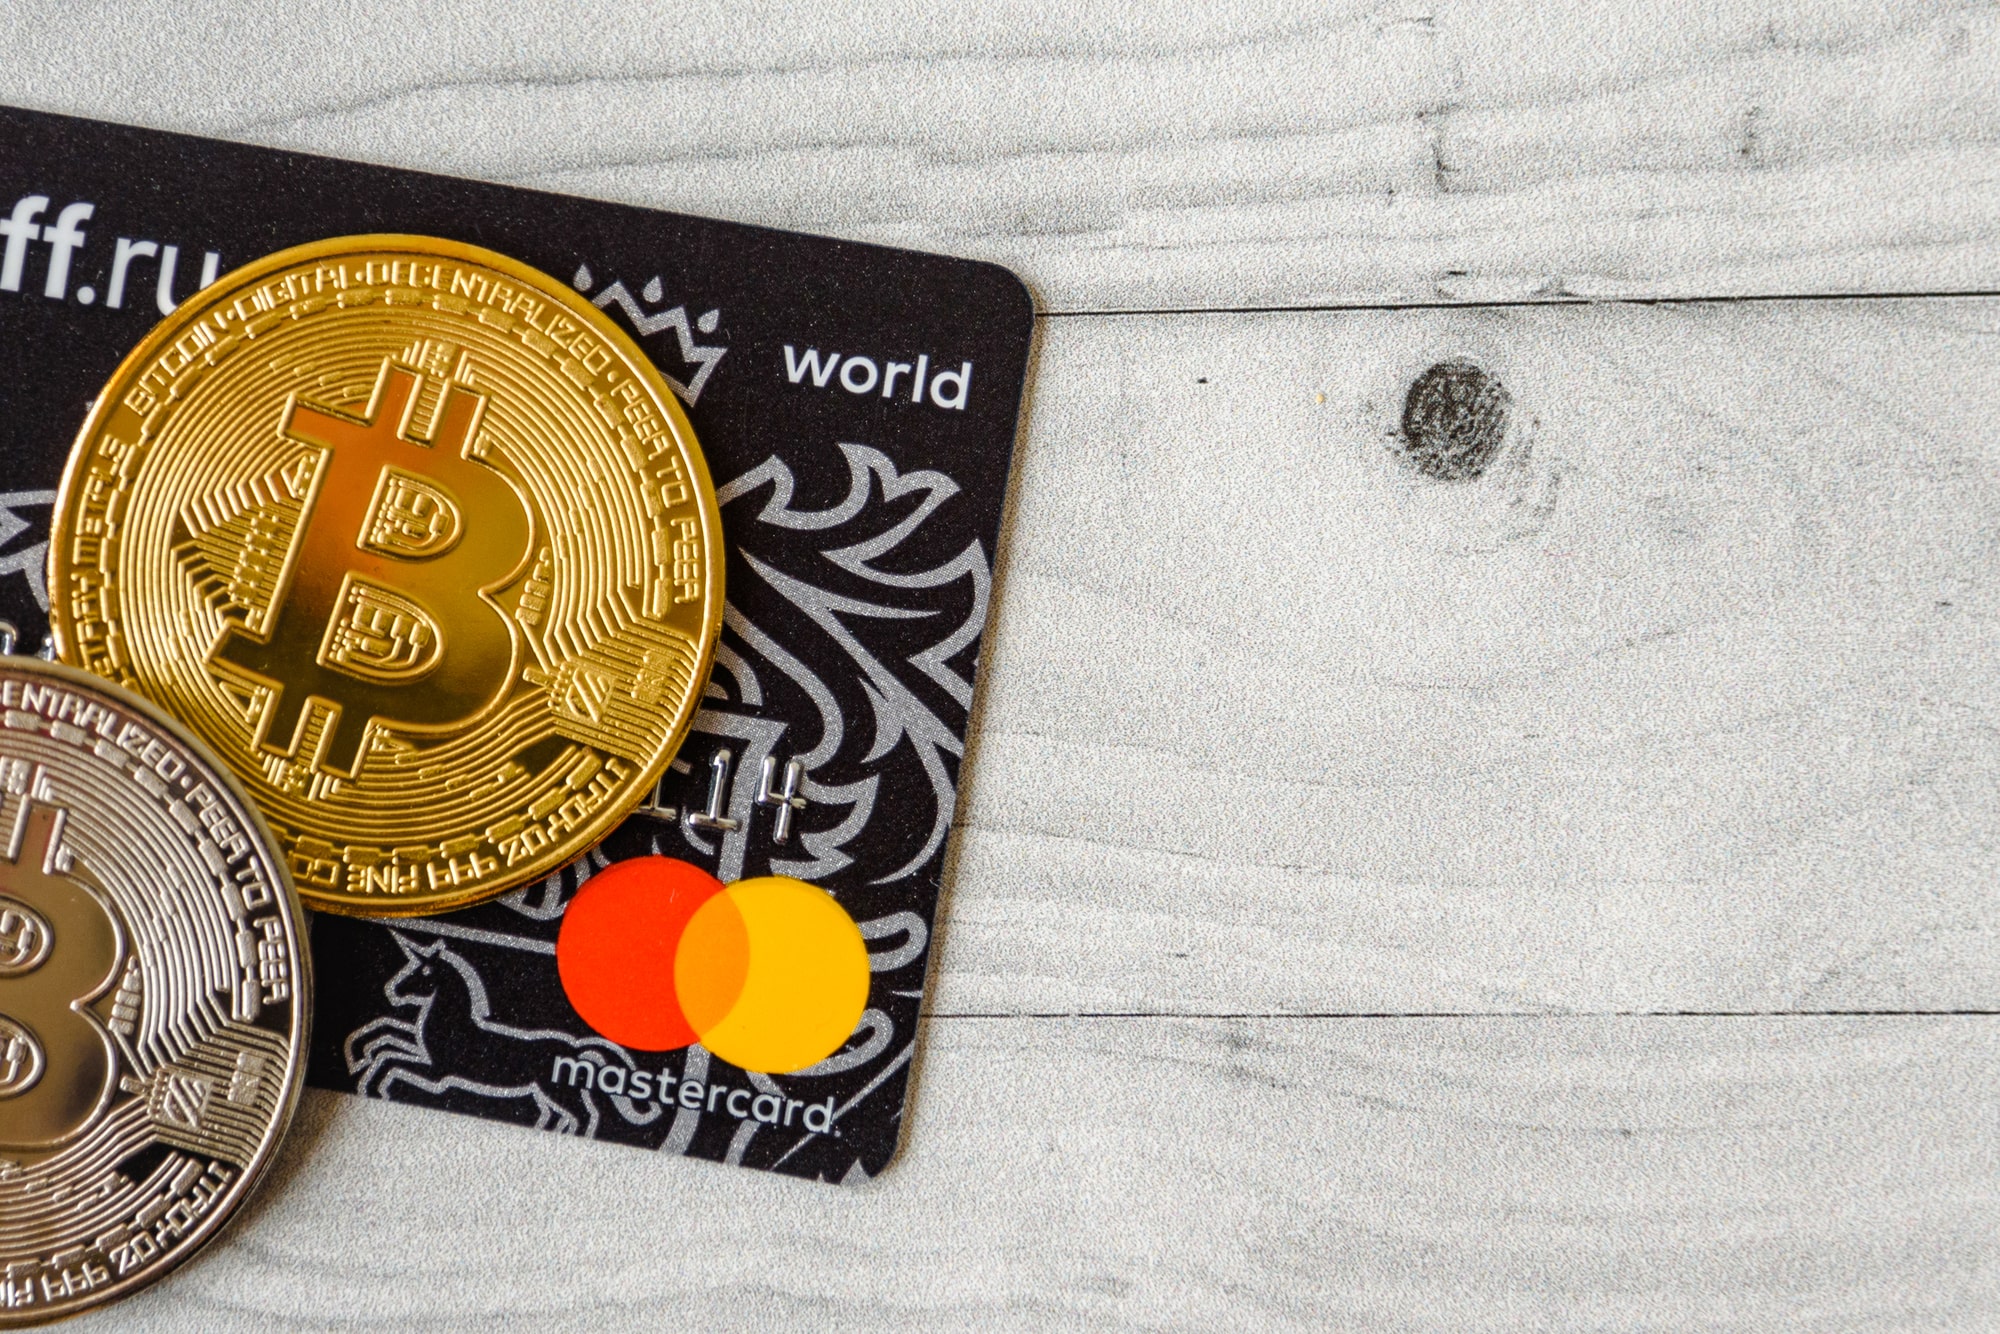 Mastercard team up with Bakkt for crypto card payments